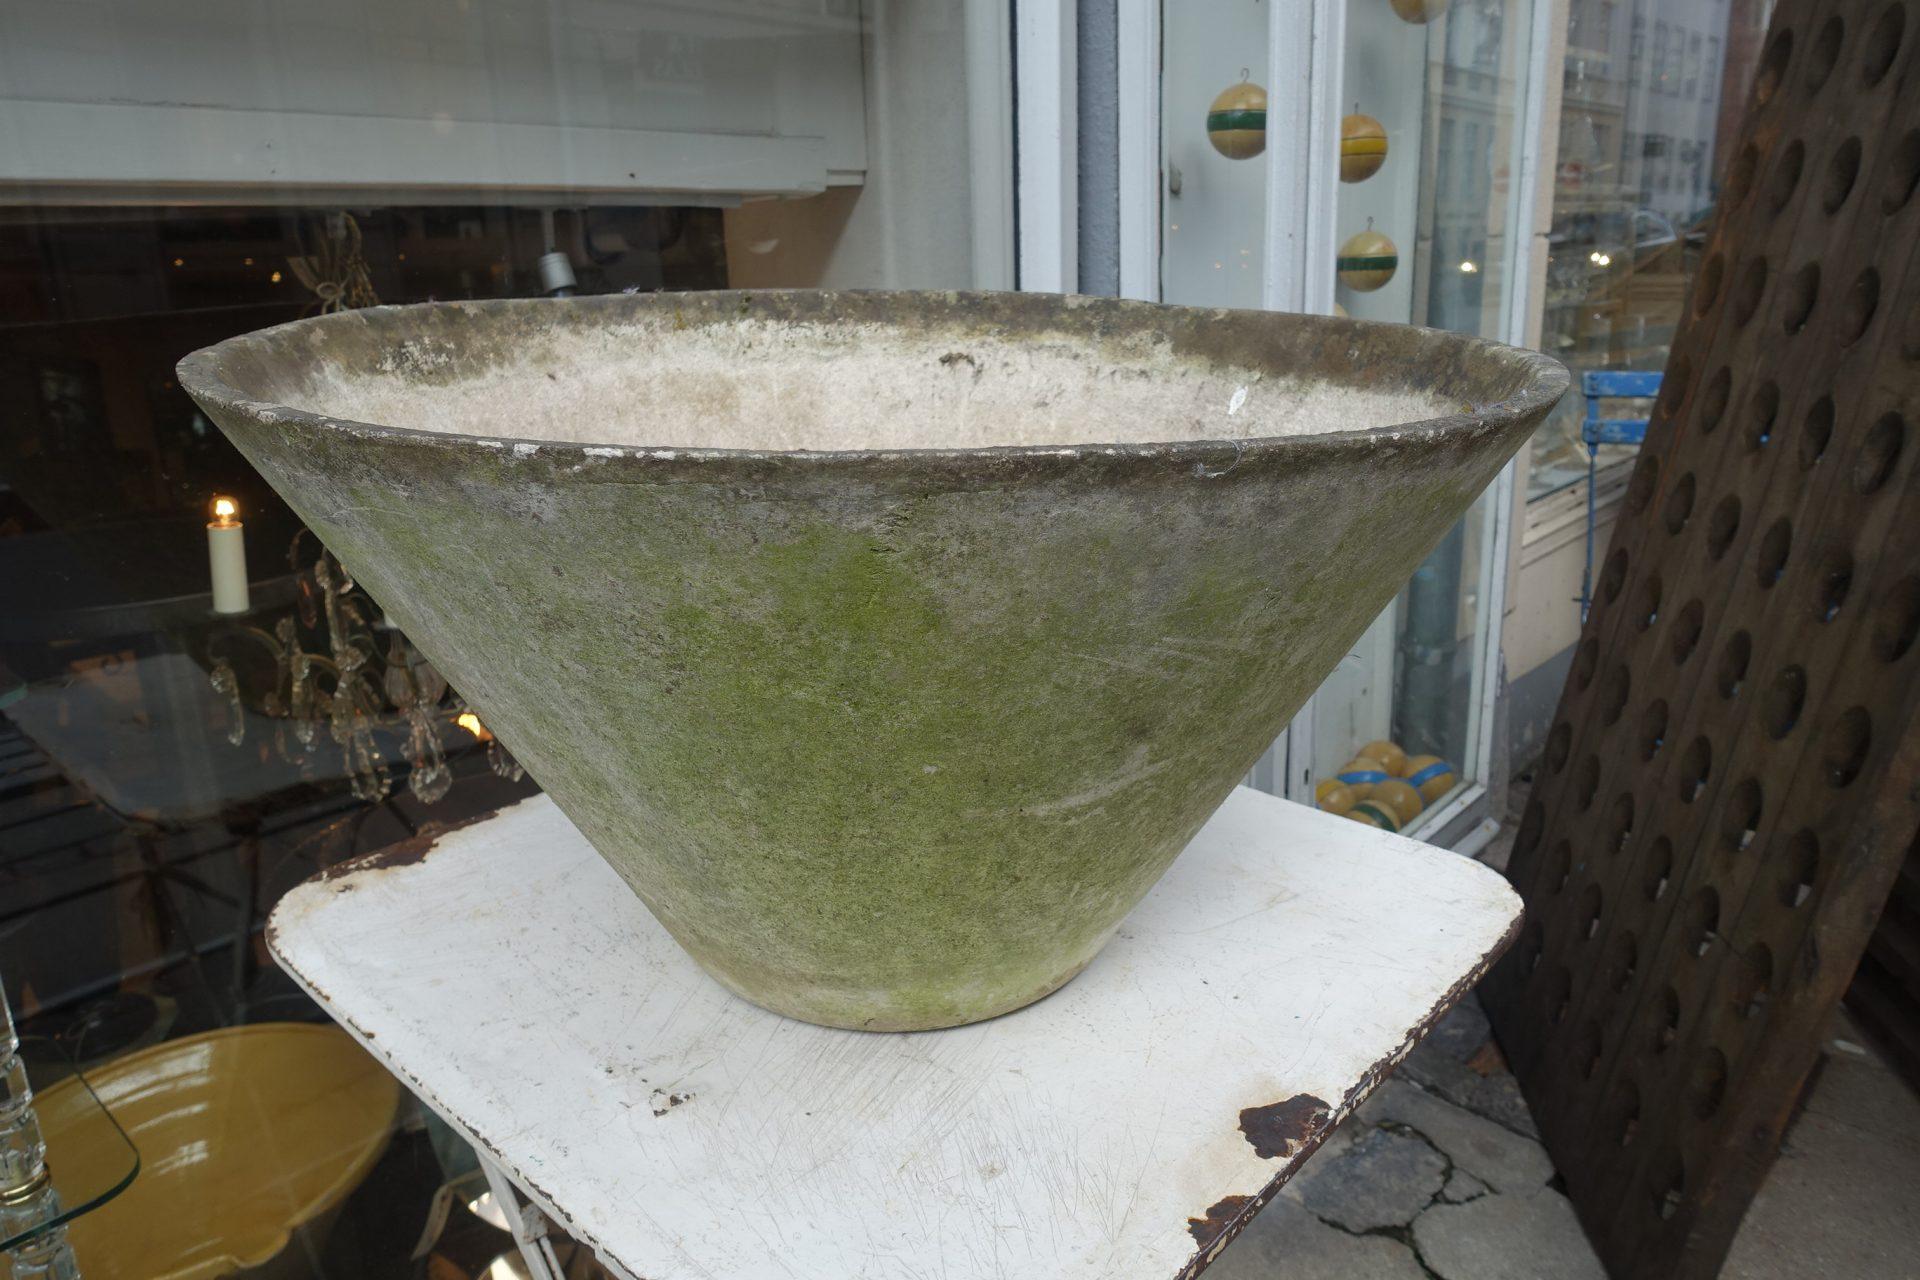 Elegant and sought after garden planter / jardinière, designed by Willy Guhl. An organic large conical shaped pot, with fantastic patina from wind and weather. Produced in fibre cement at Eternit Schweiz AG back in the 1960s.

Willy Guhl was a